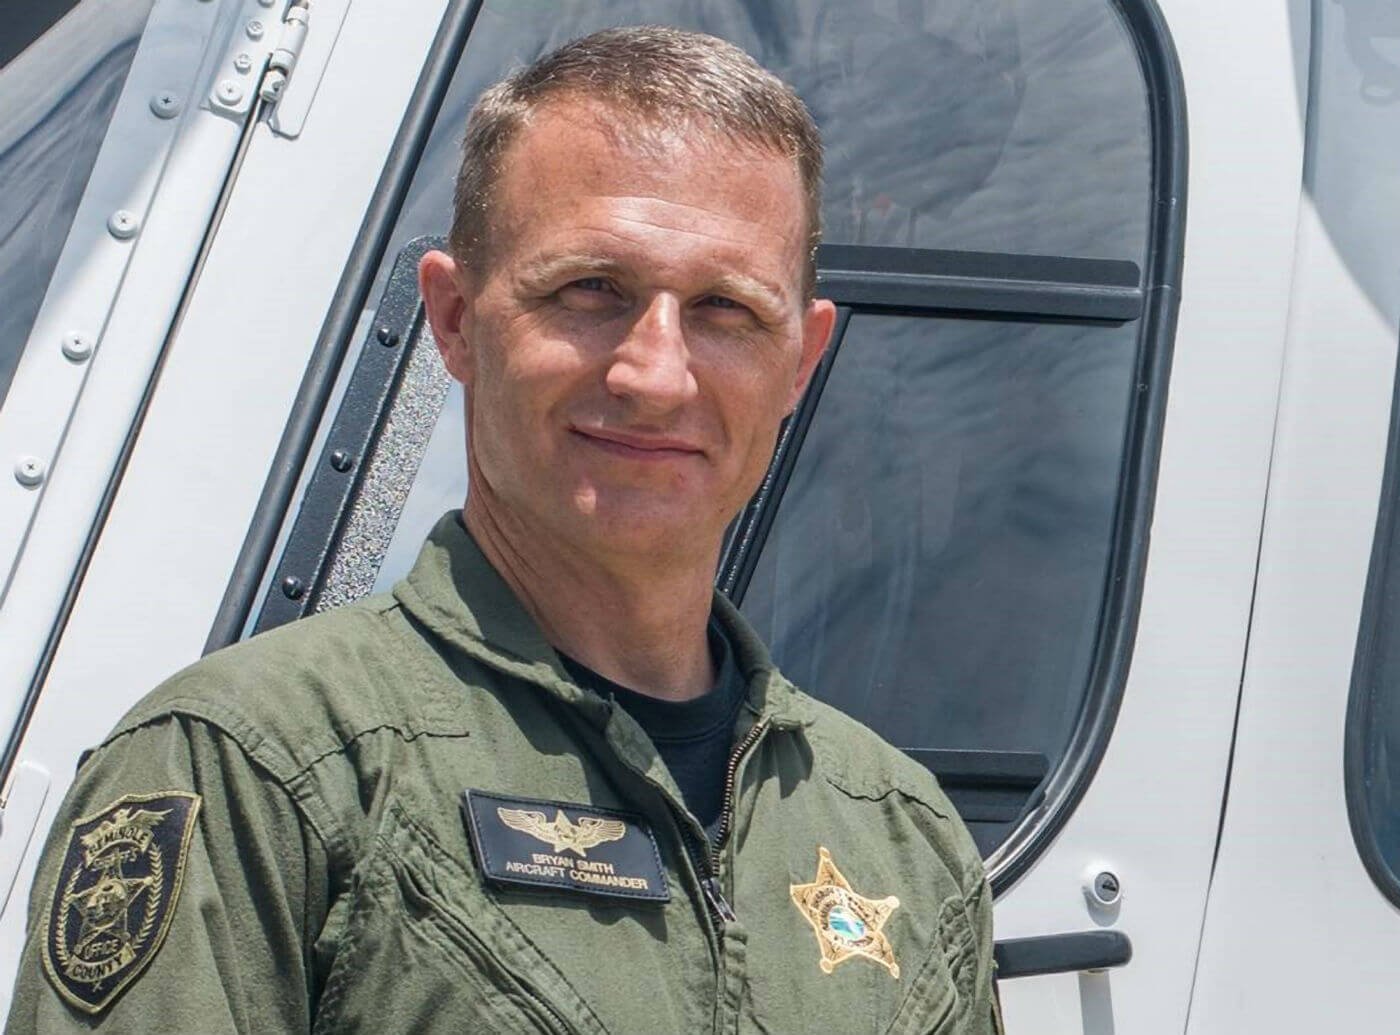 A pilot since 1992, Bryan Smith flies rotary-and fixed-wing aircraft for the Seminole County Sheriff’s Office, where he serves as safety officer and instructor pilot. HAI Photo